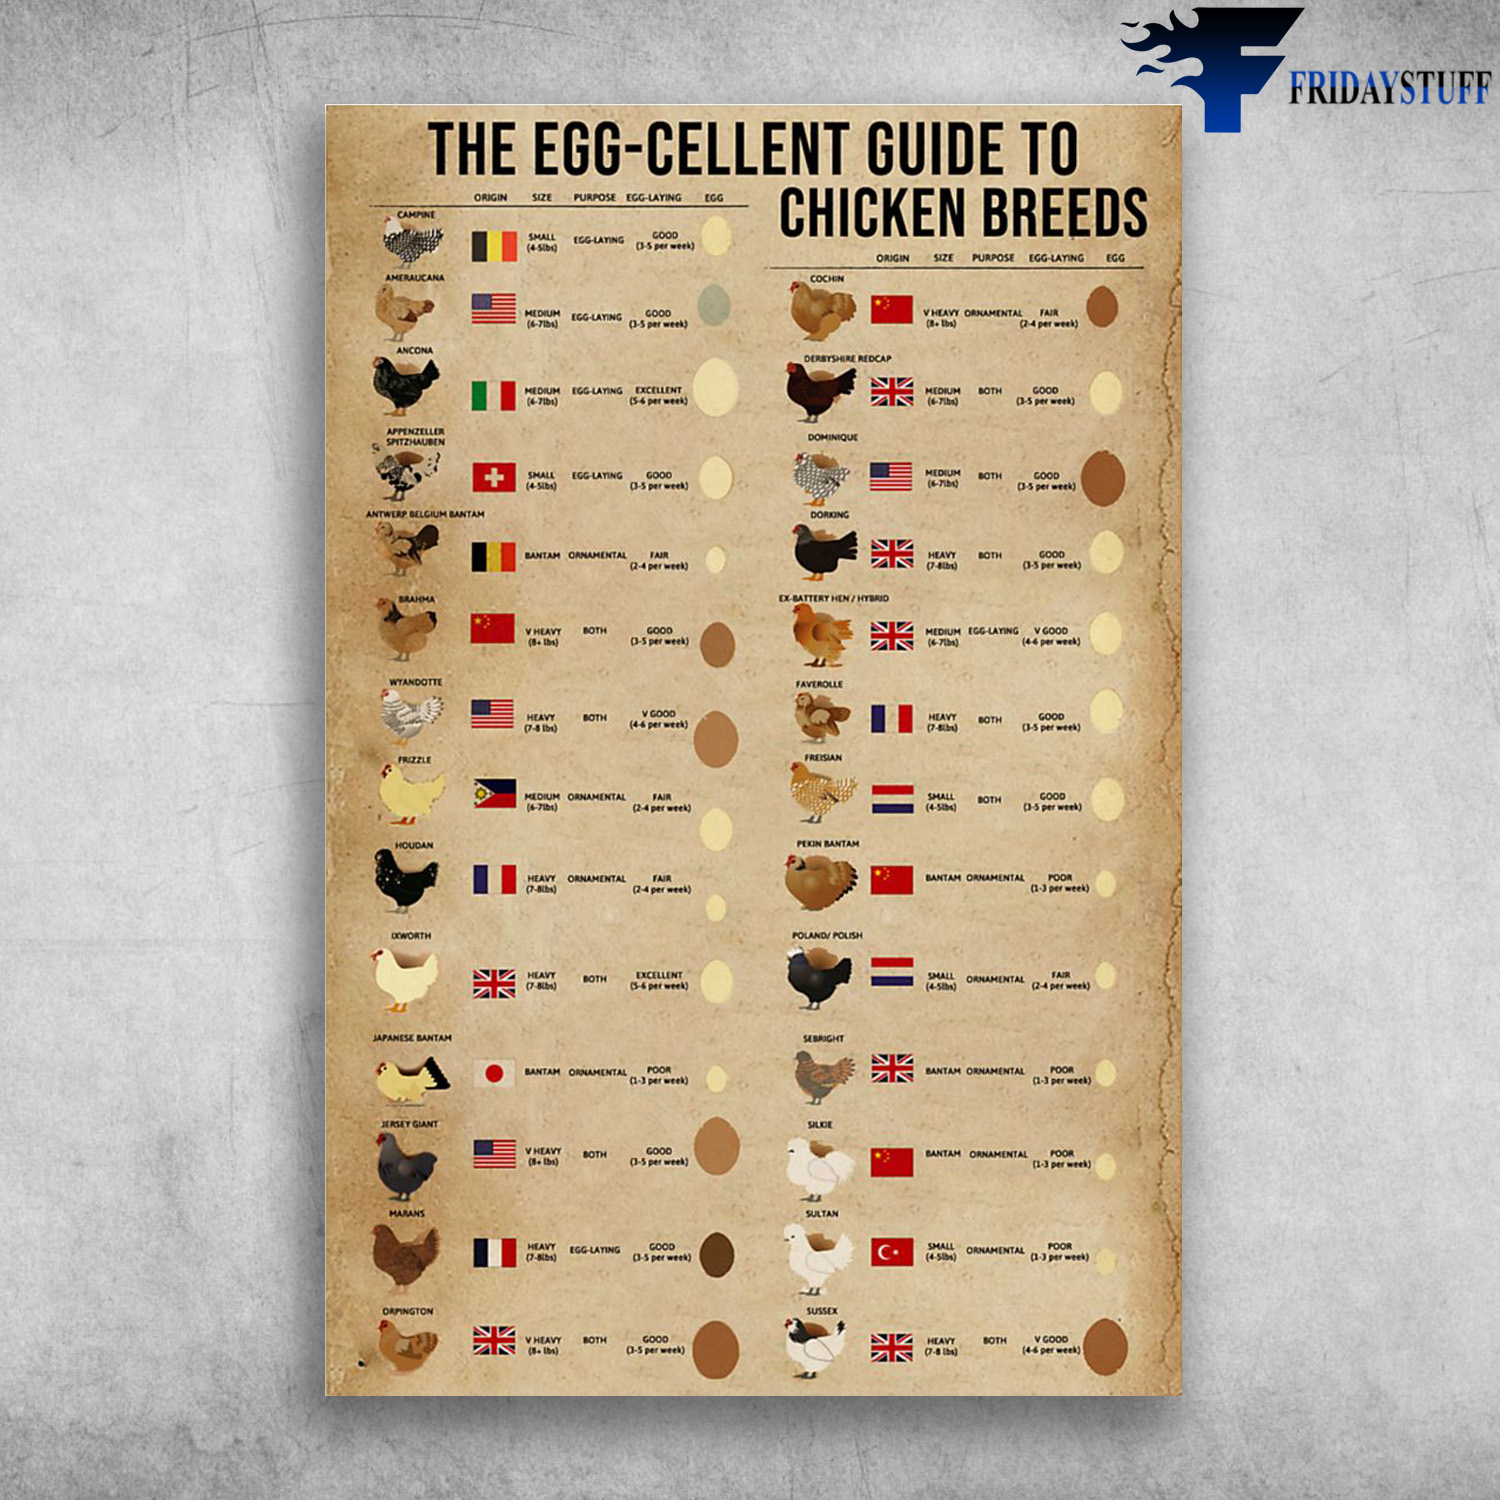 The Egg-Cellent Guide To Chicken Breeds